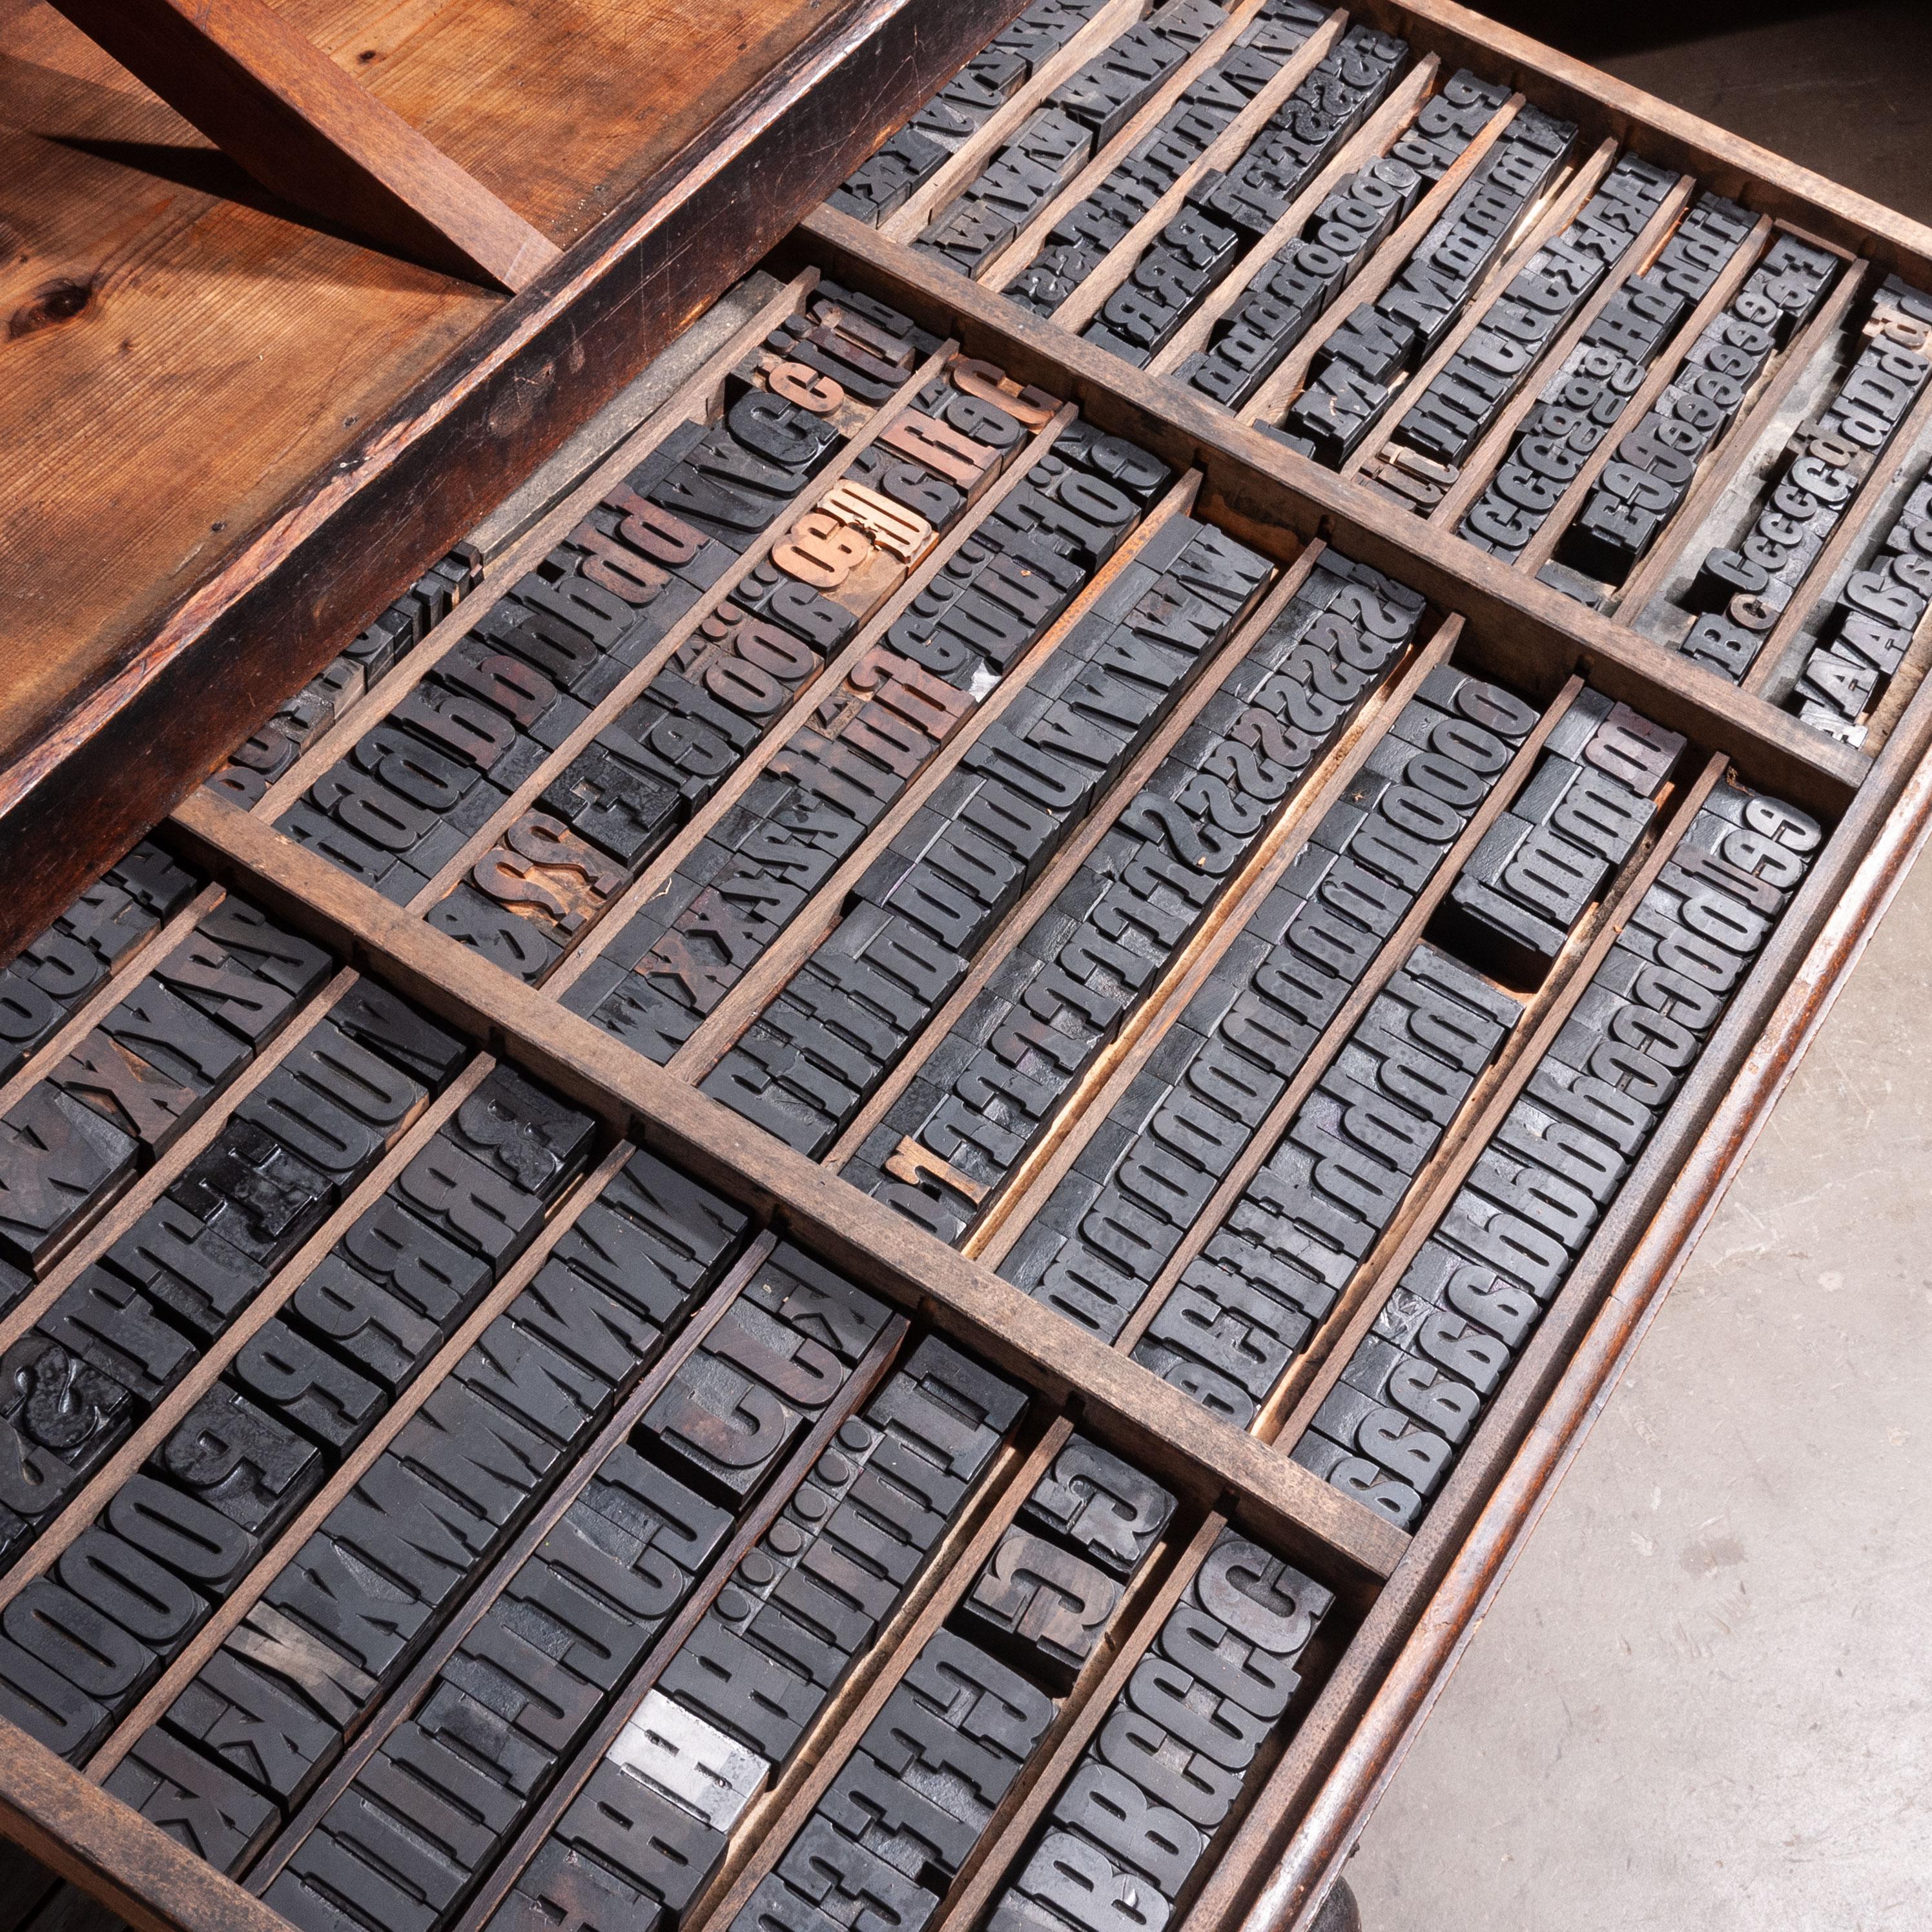 Early 20th Century 1920s Printers Cabinet / Drawer Unit with Complete Original Letterpress Typogra